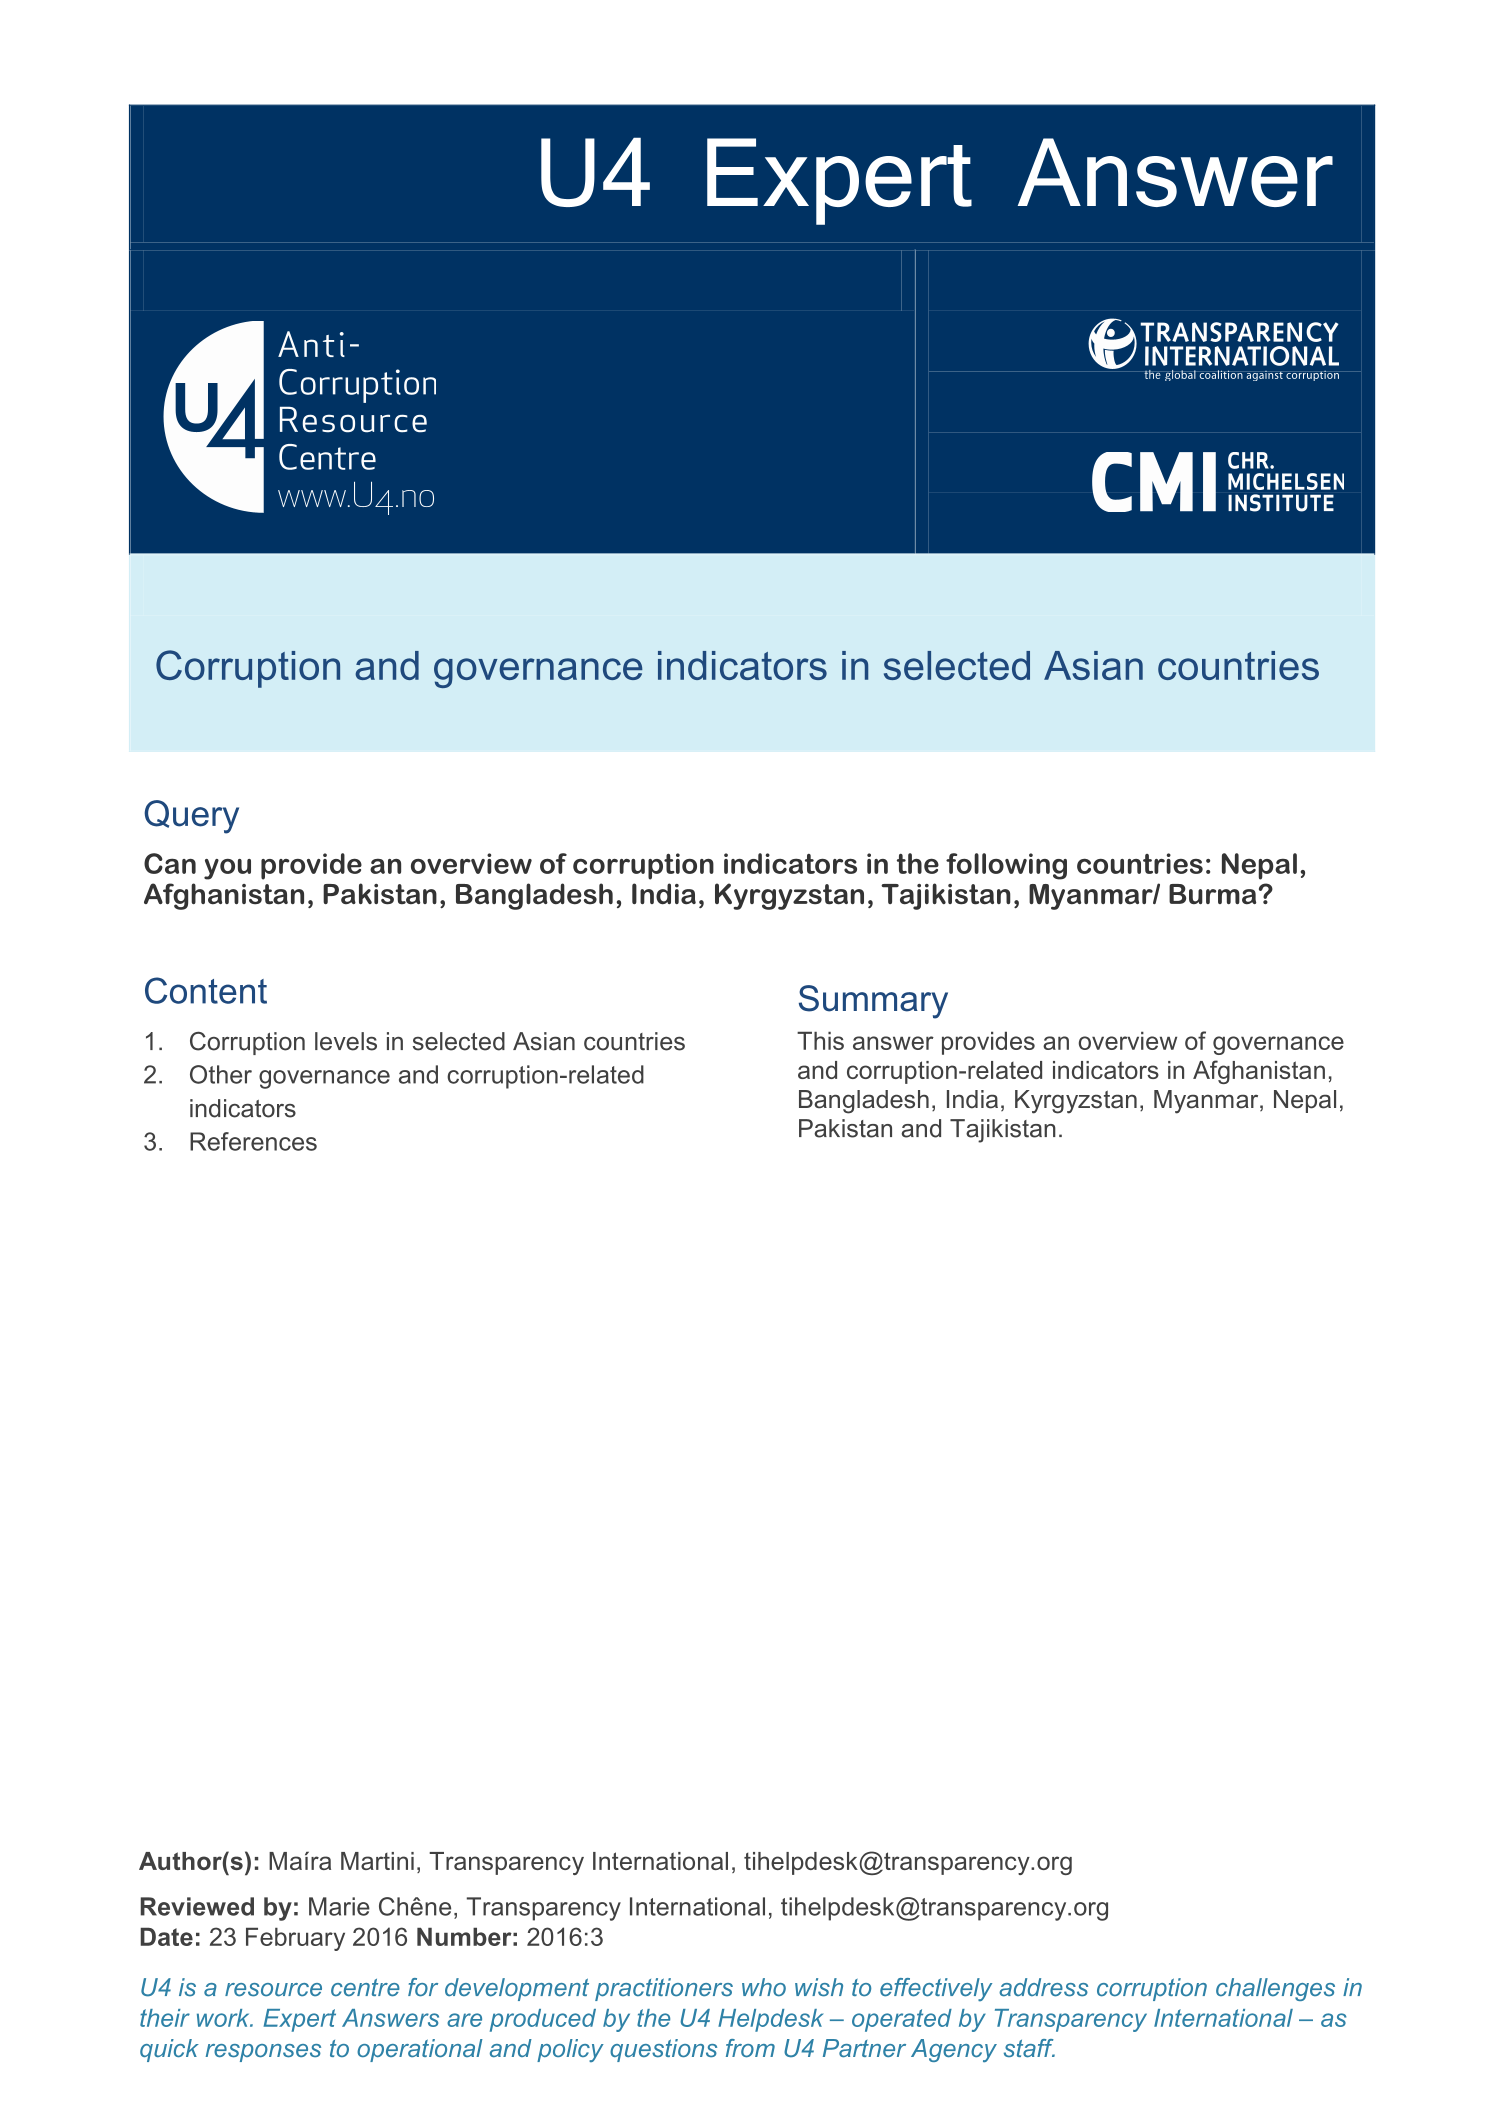 Corruption and governance indicators in selected Asian countries